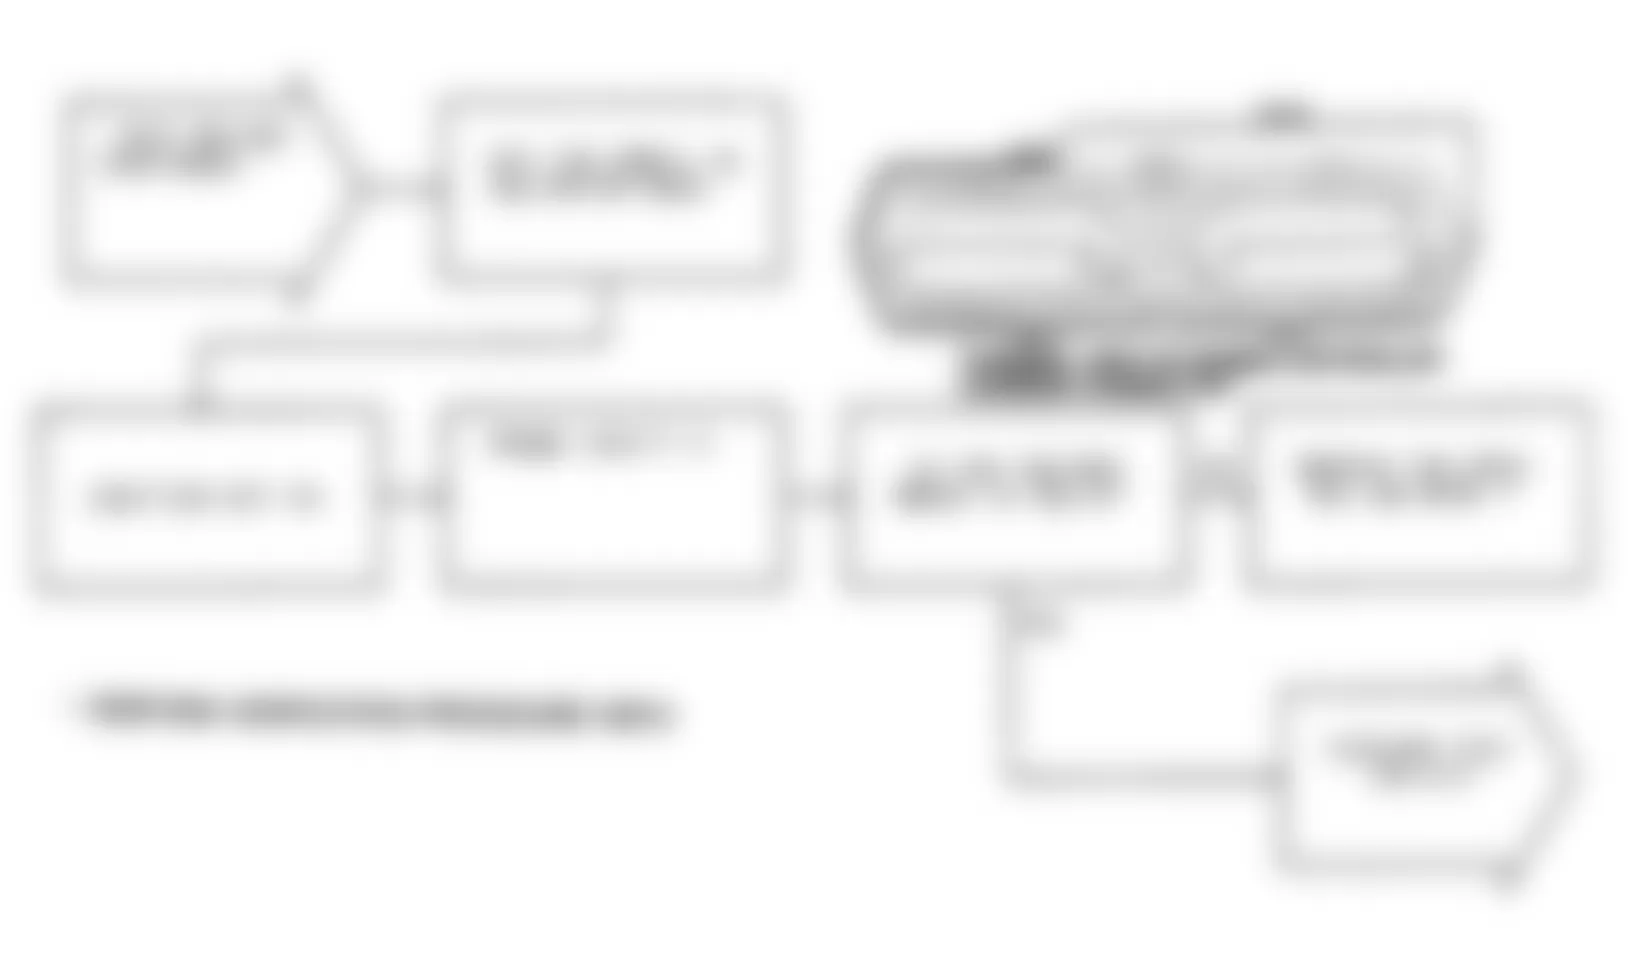 Chrysler Imperial 1991 - Component Locations -  Test DR-40A: Flowchart (2 of 2)